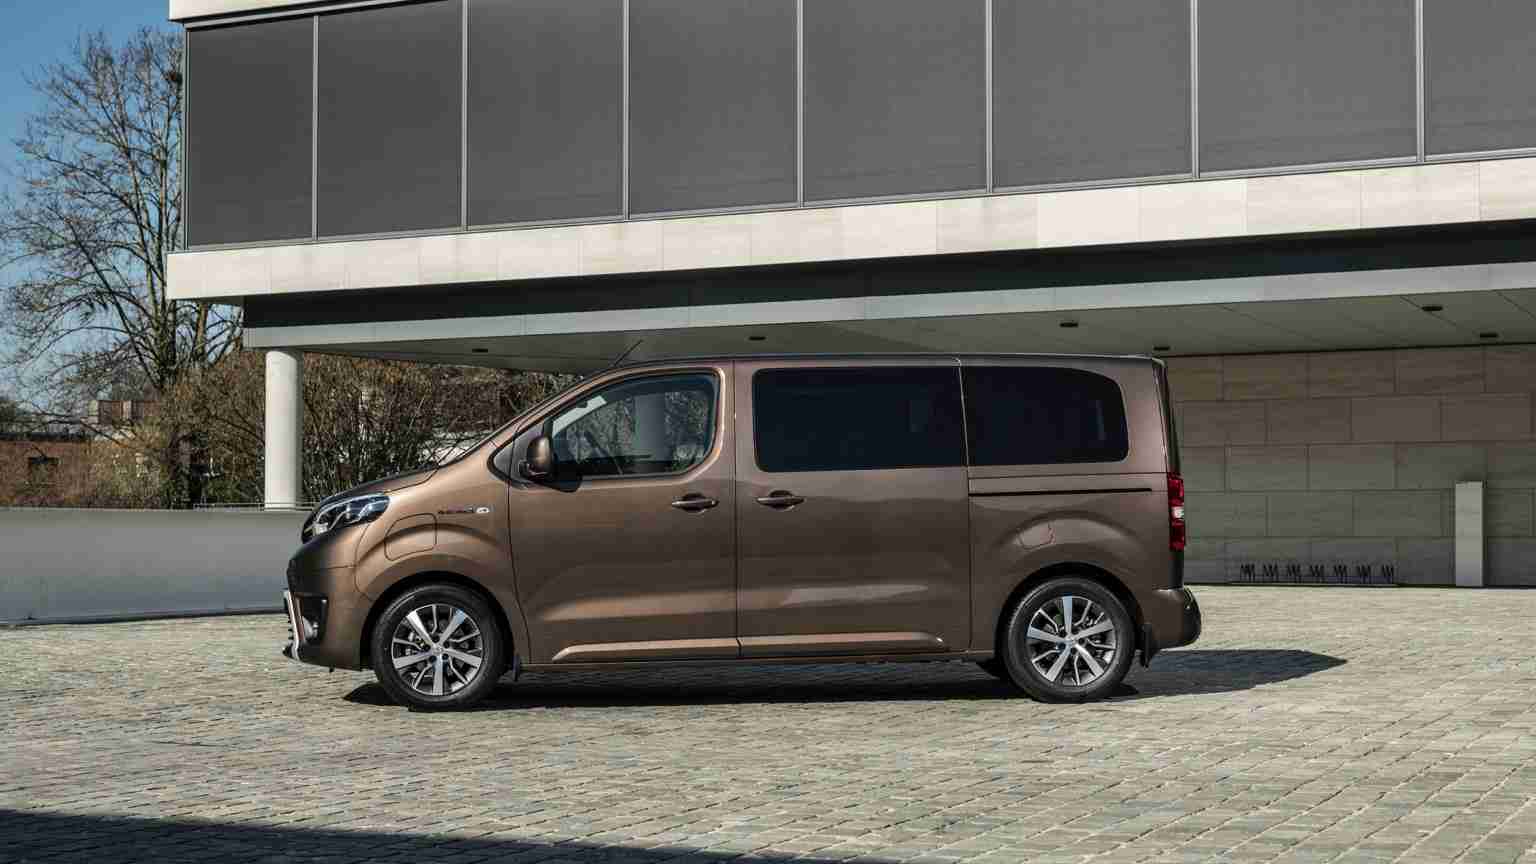 Toyota PROACE Shuttle M 50 kWh Electric Car